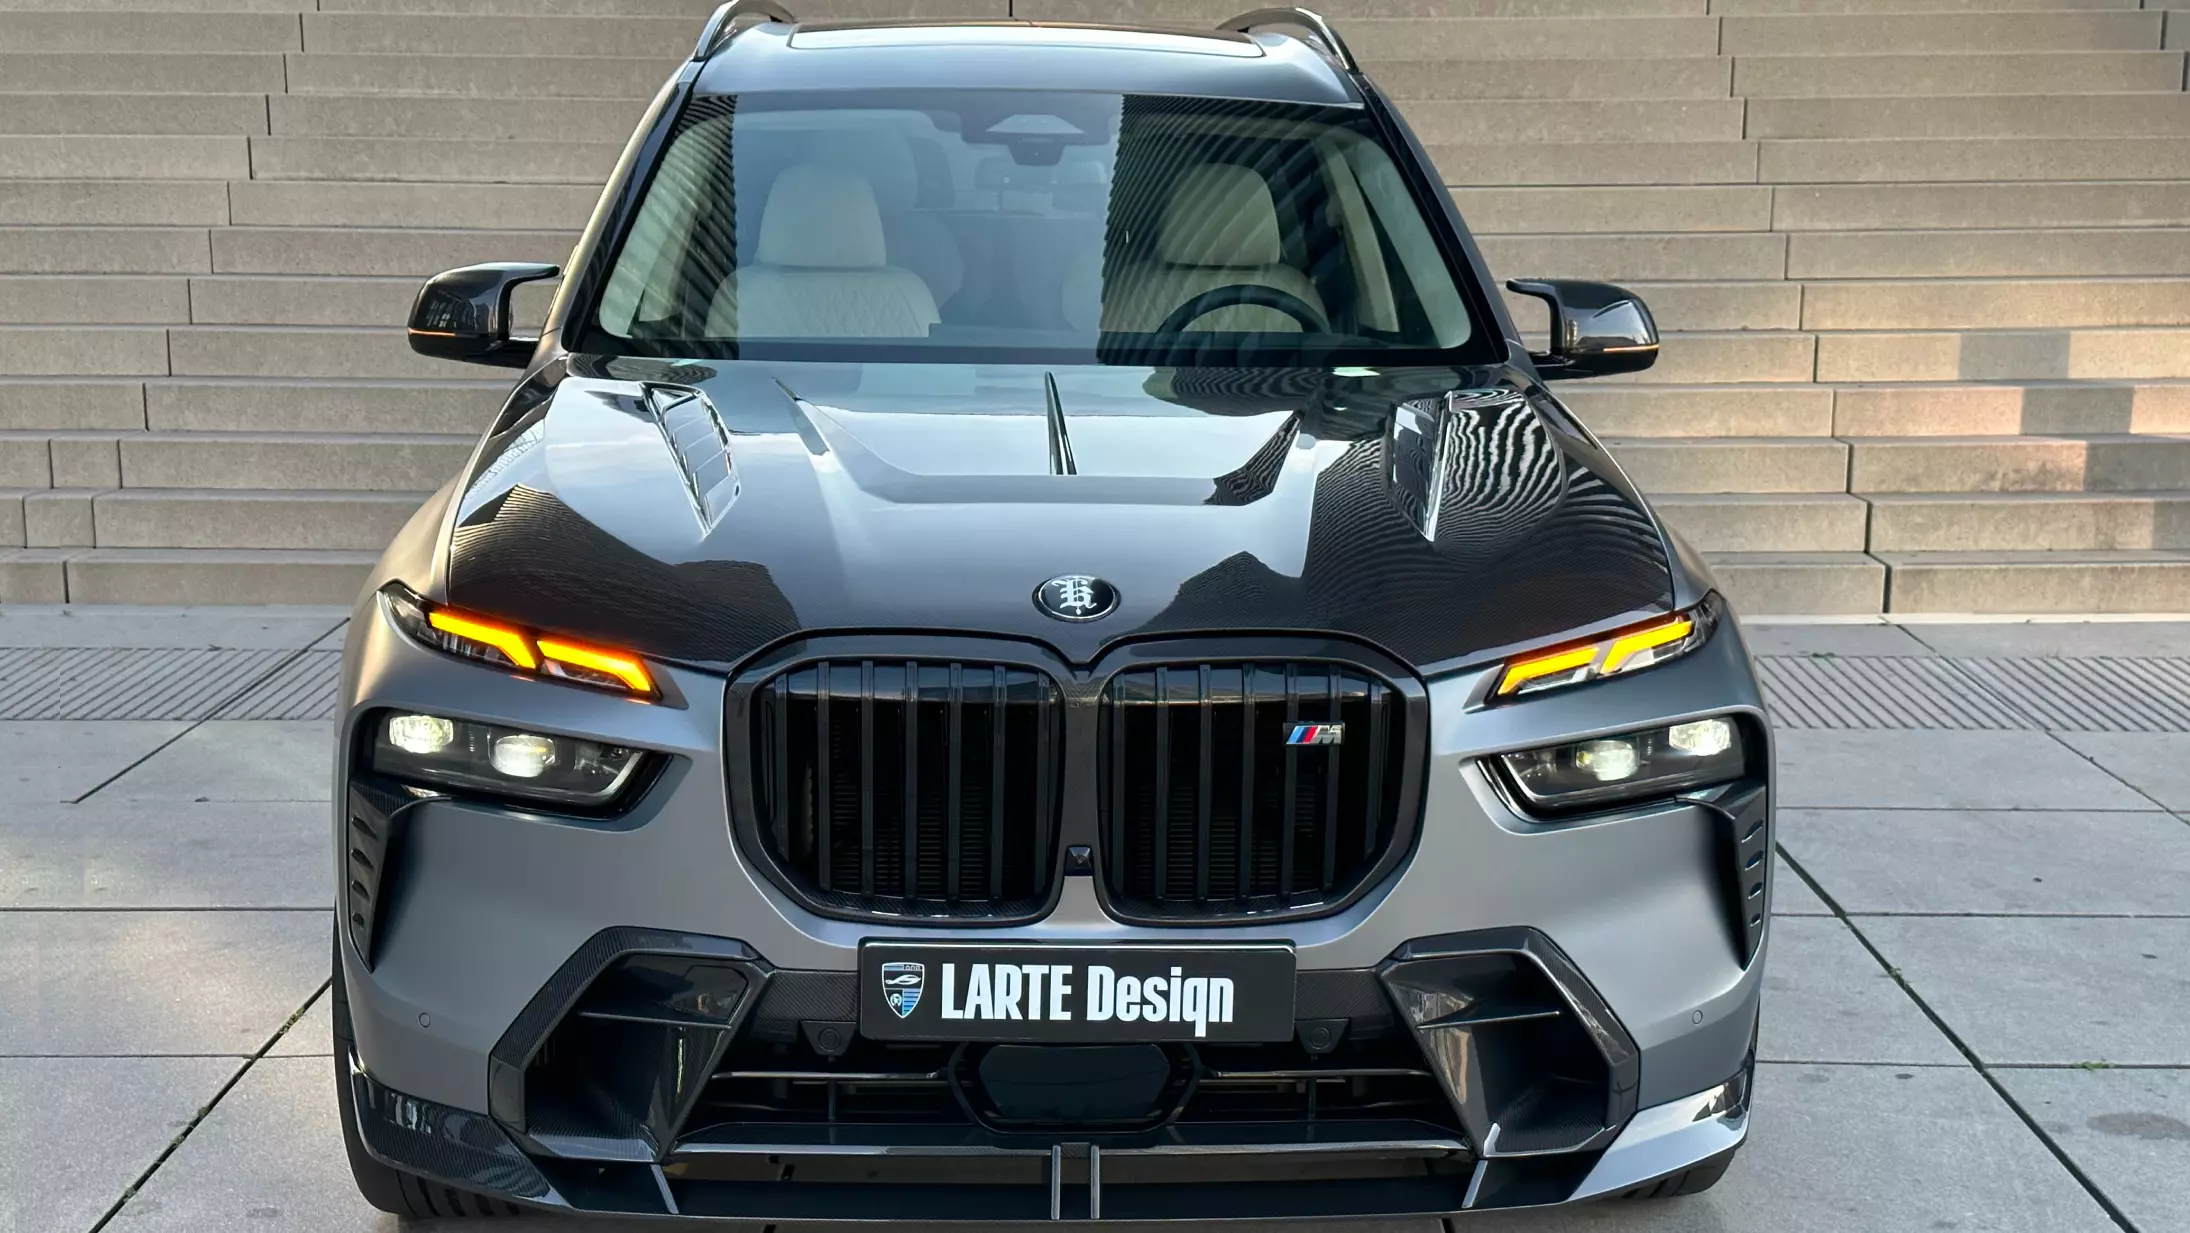 Front view on a BMW X7 with a body kit giving the car a custom appearance